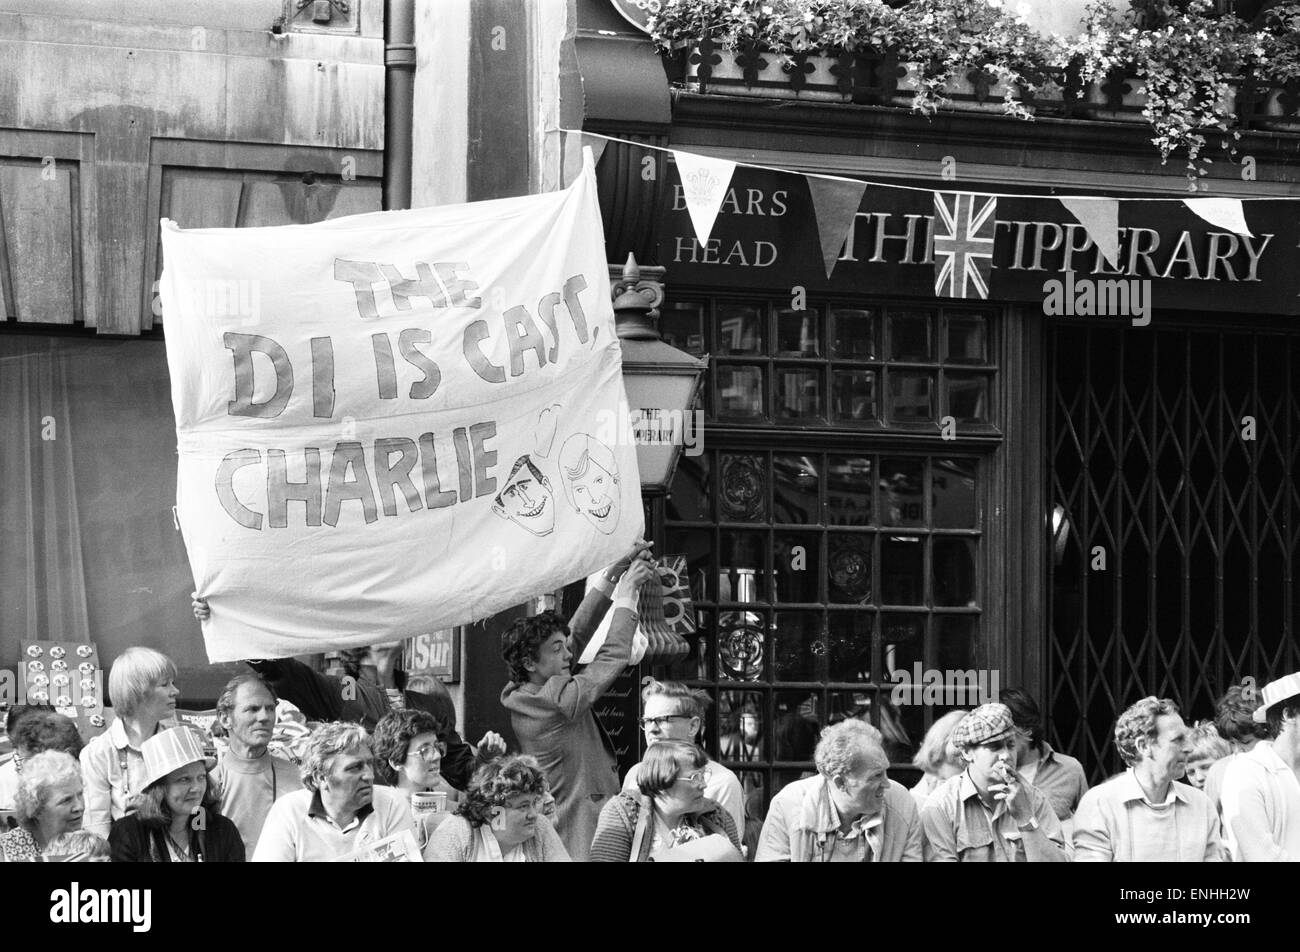 Wedding day of Prince Charles & Lady Diana Spencer, 29th July 1981. Pictured: Crowd of well wishers, with banner 'The Di Is Cast Charlie', outside The Tipparary pub in London. Stock Photo